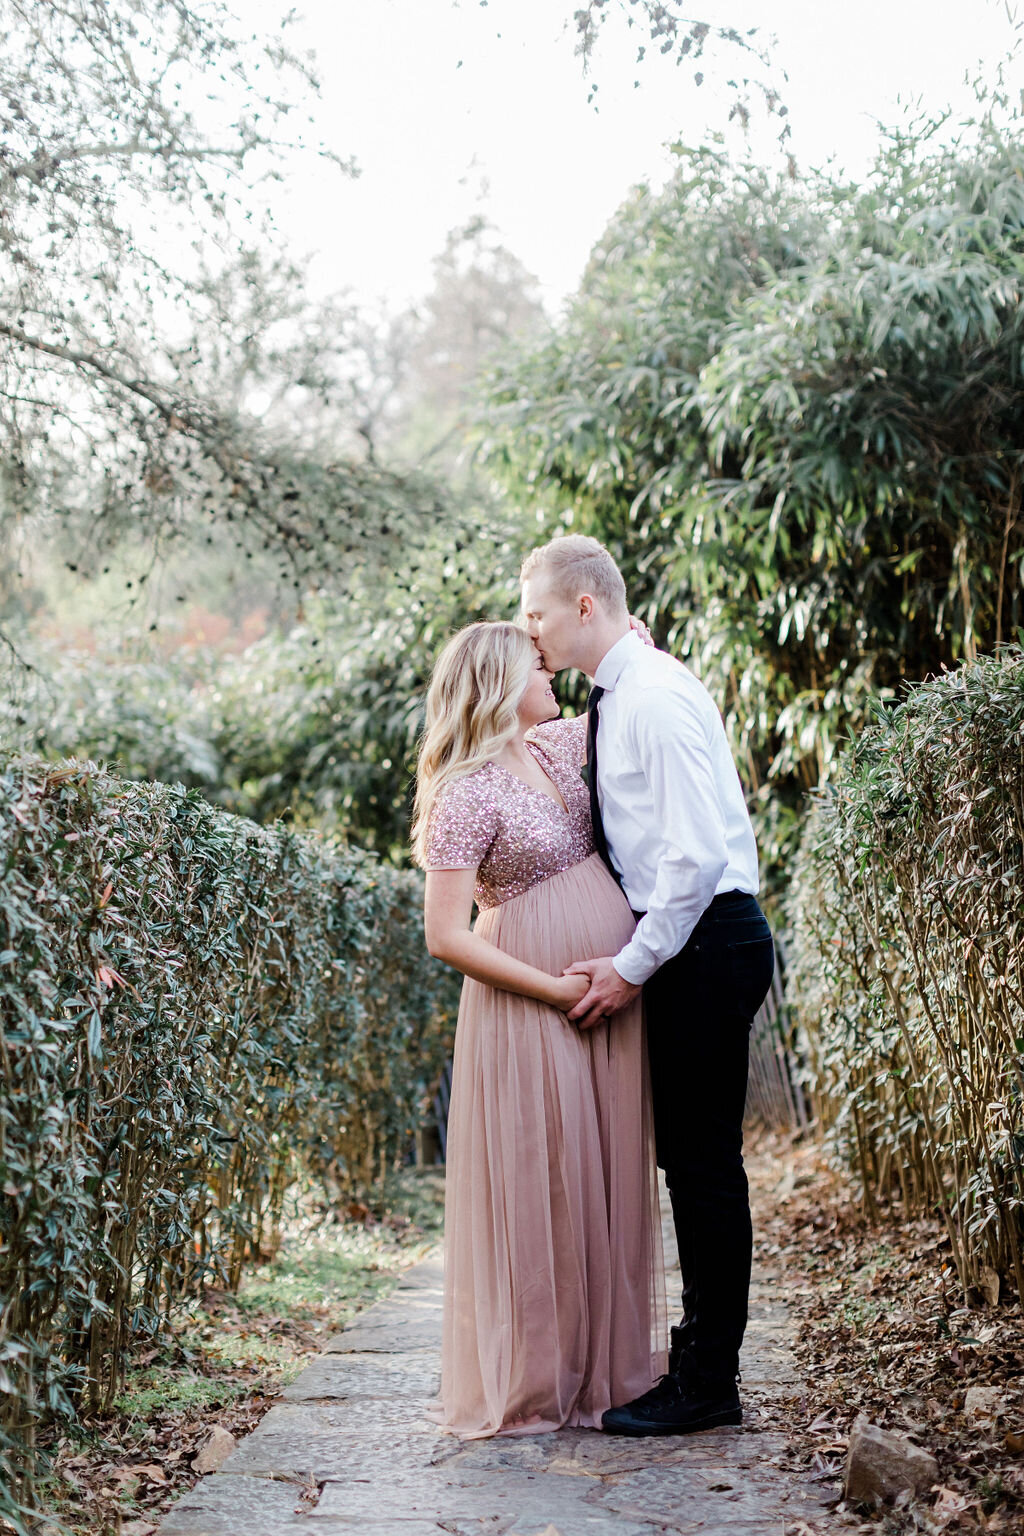 Expectant parents admiringly looking at each other as they anticipate the arrival of their baby boy. This maternity session was taken at Maymont in Richmond, Virginia